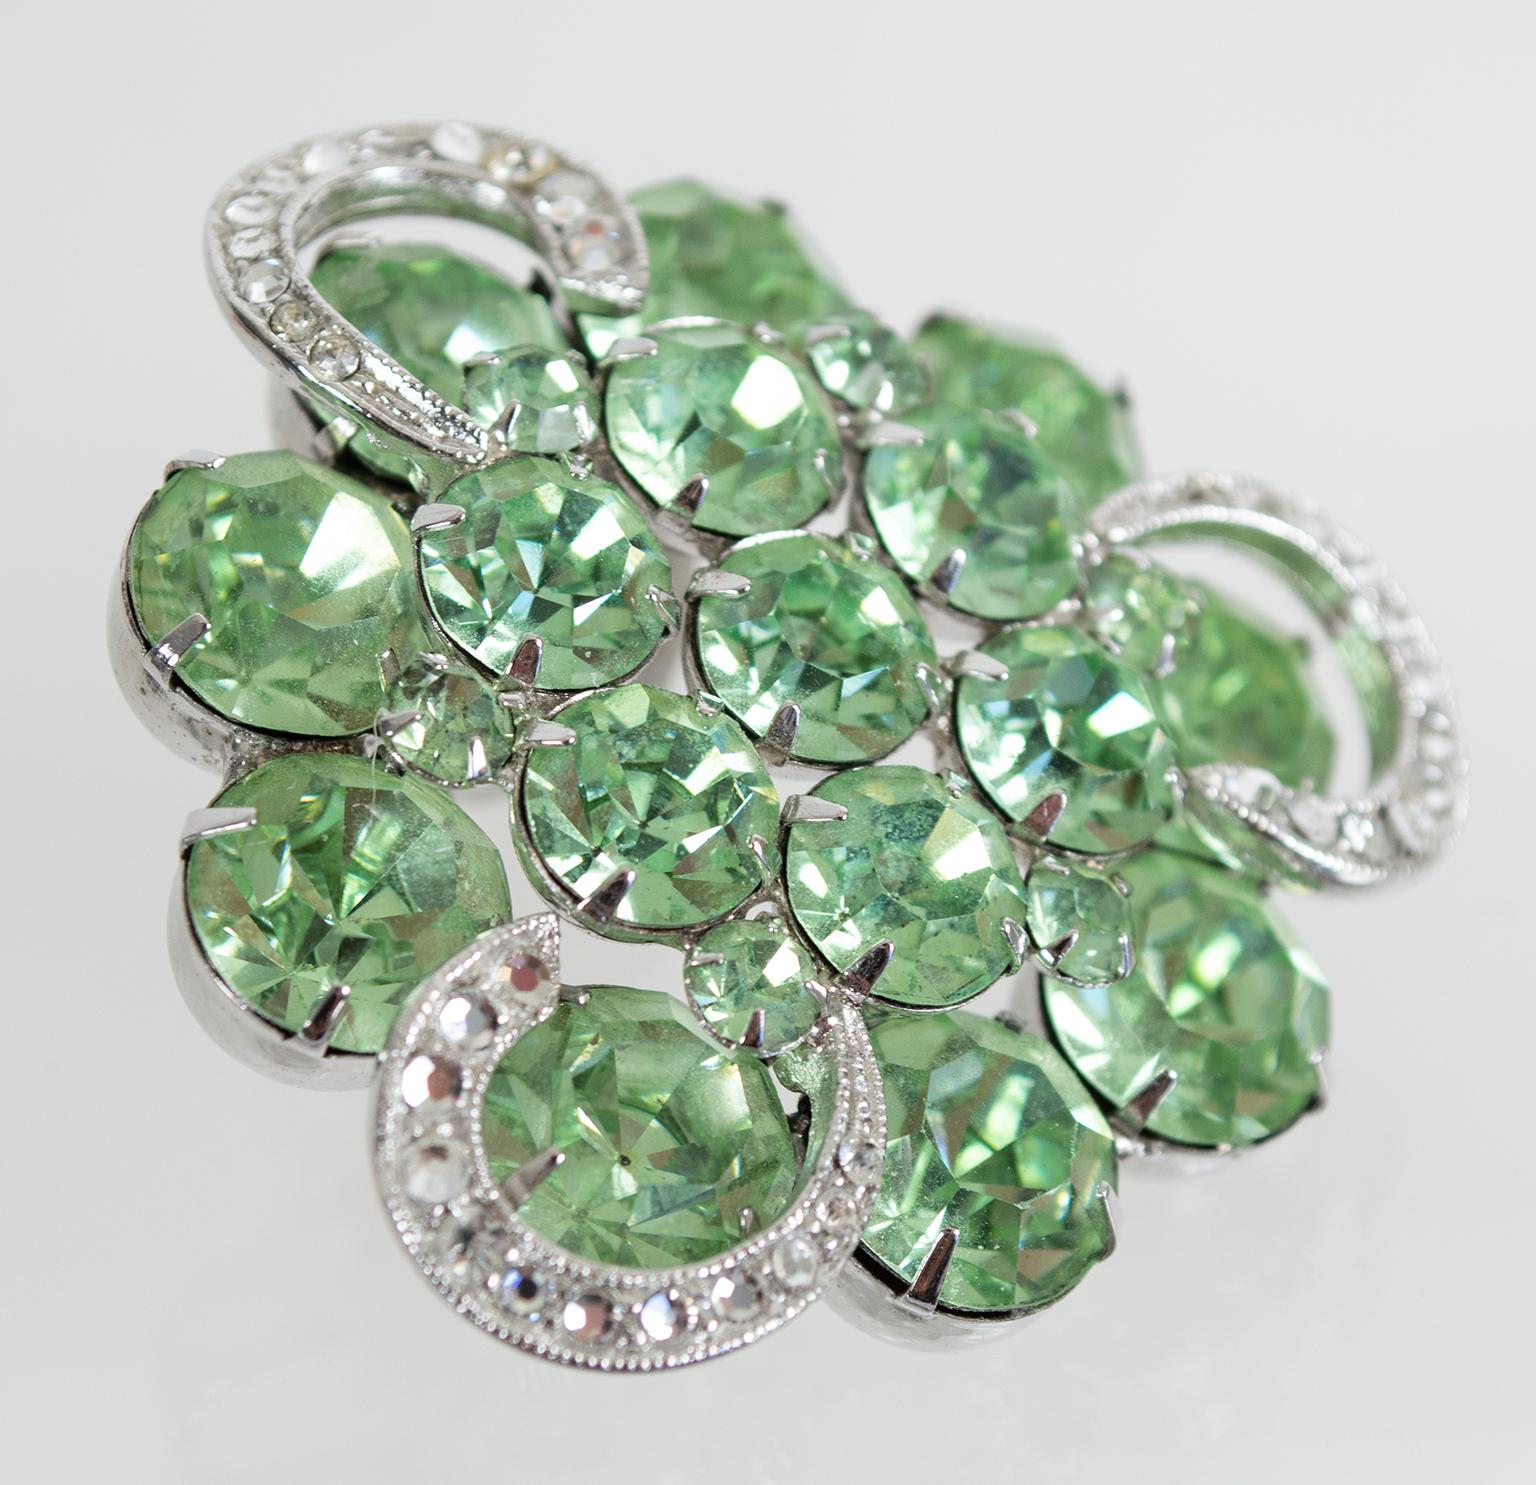 If luck has been less than a lady lately, perhaps it's time for a little encouragement. With 16 massive green crystals this brooch has enough dazzle to get Lady Luck's attention, and its three pavé horseshoes will seal the deal.

Rounded triangle